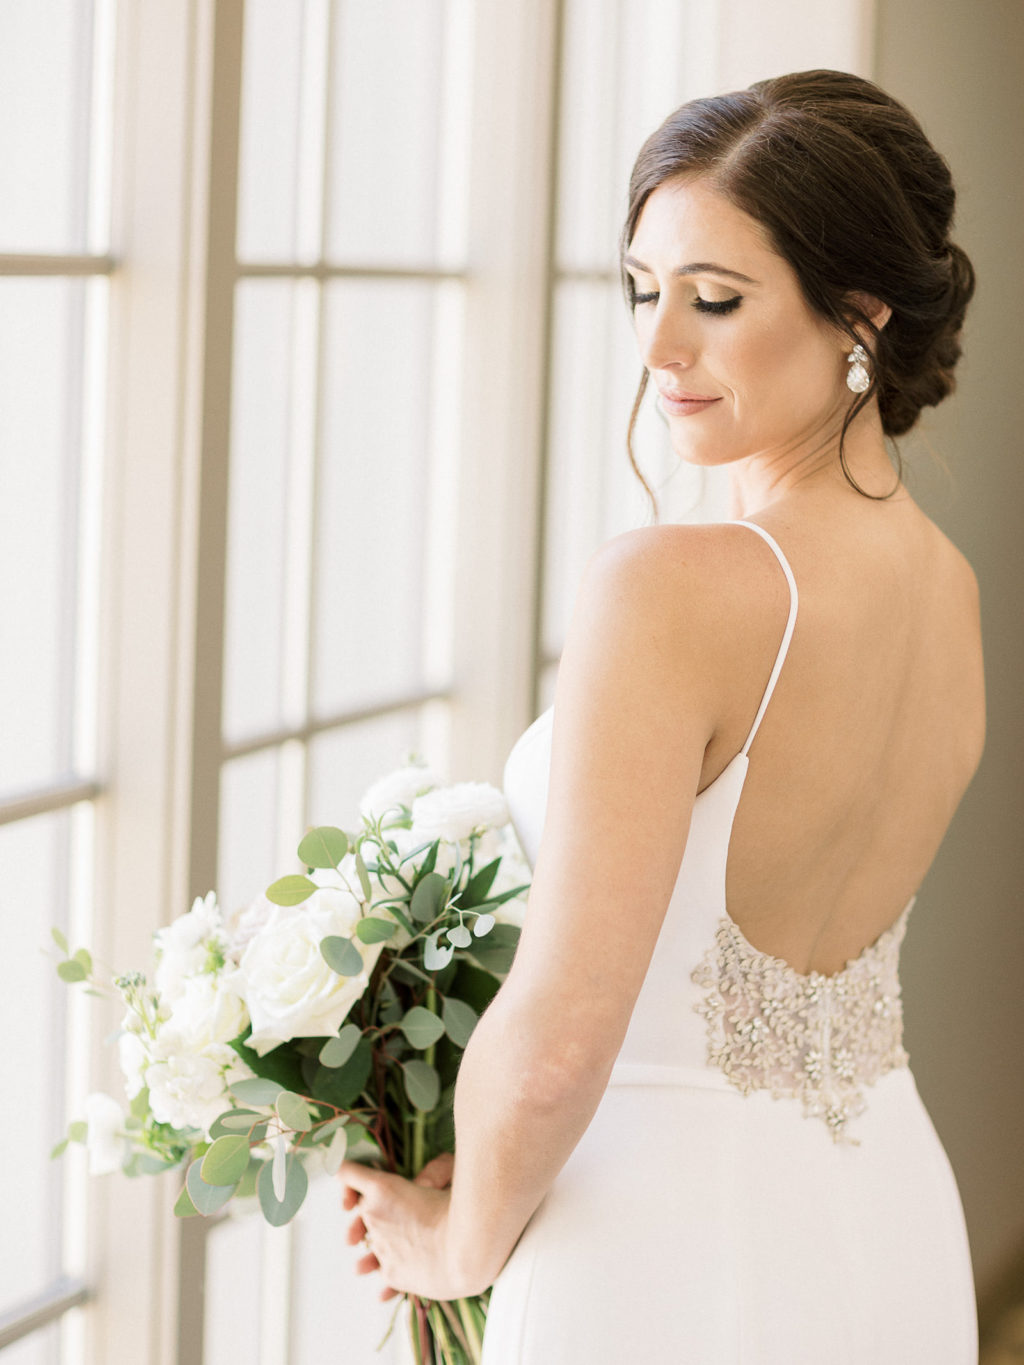 Florida Bride Wearing Classic Spaghetti Strap Open Back with Beige Floral and Illusion Lace/Rhinestone Paloma Blanca Wedding Dress Holding White Roses and Eucalyptus Floral Bouquet | Tampa Bay Wedding Hair and Makeup Femme Akoi Beauty Studio